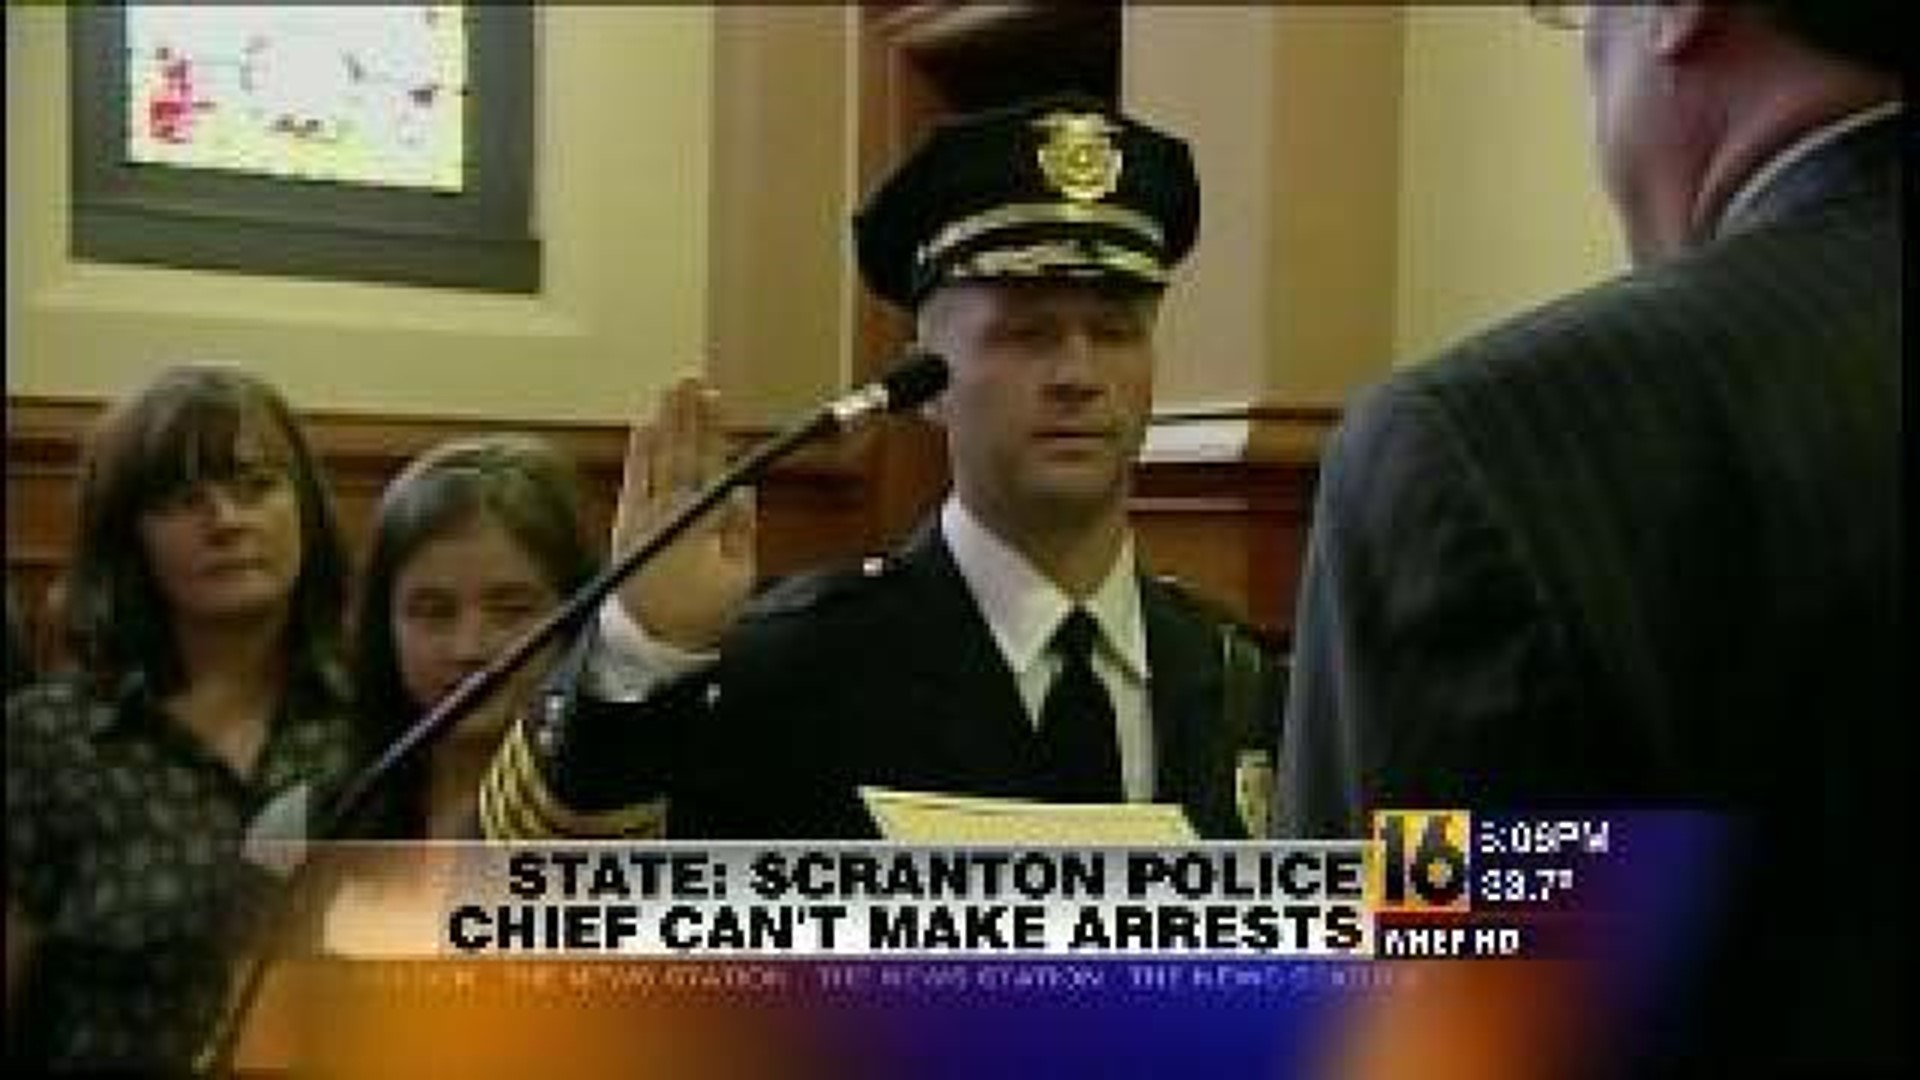 State: Scranton Police Chief Can't Make Arrests